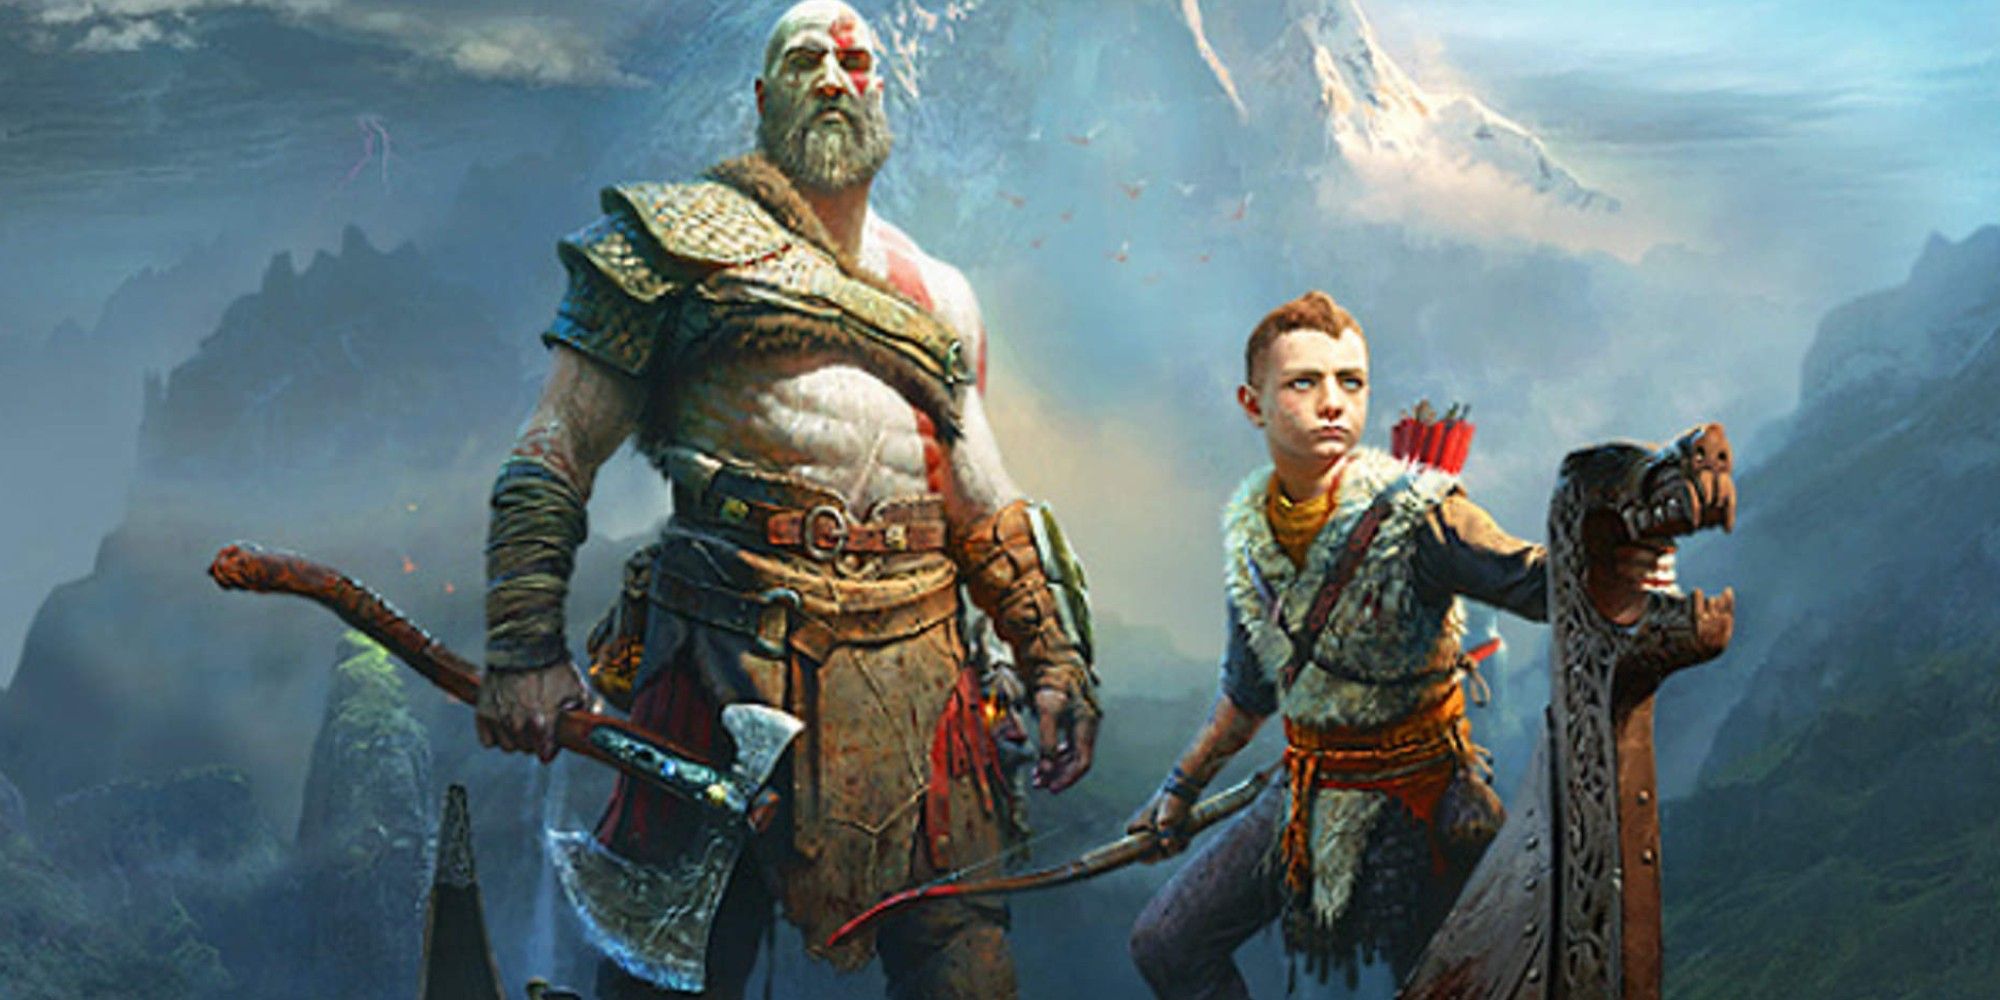 What New Realms Will Be Available In God Of War 5